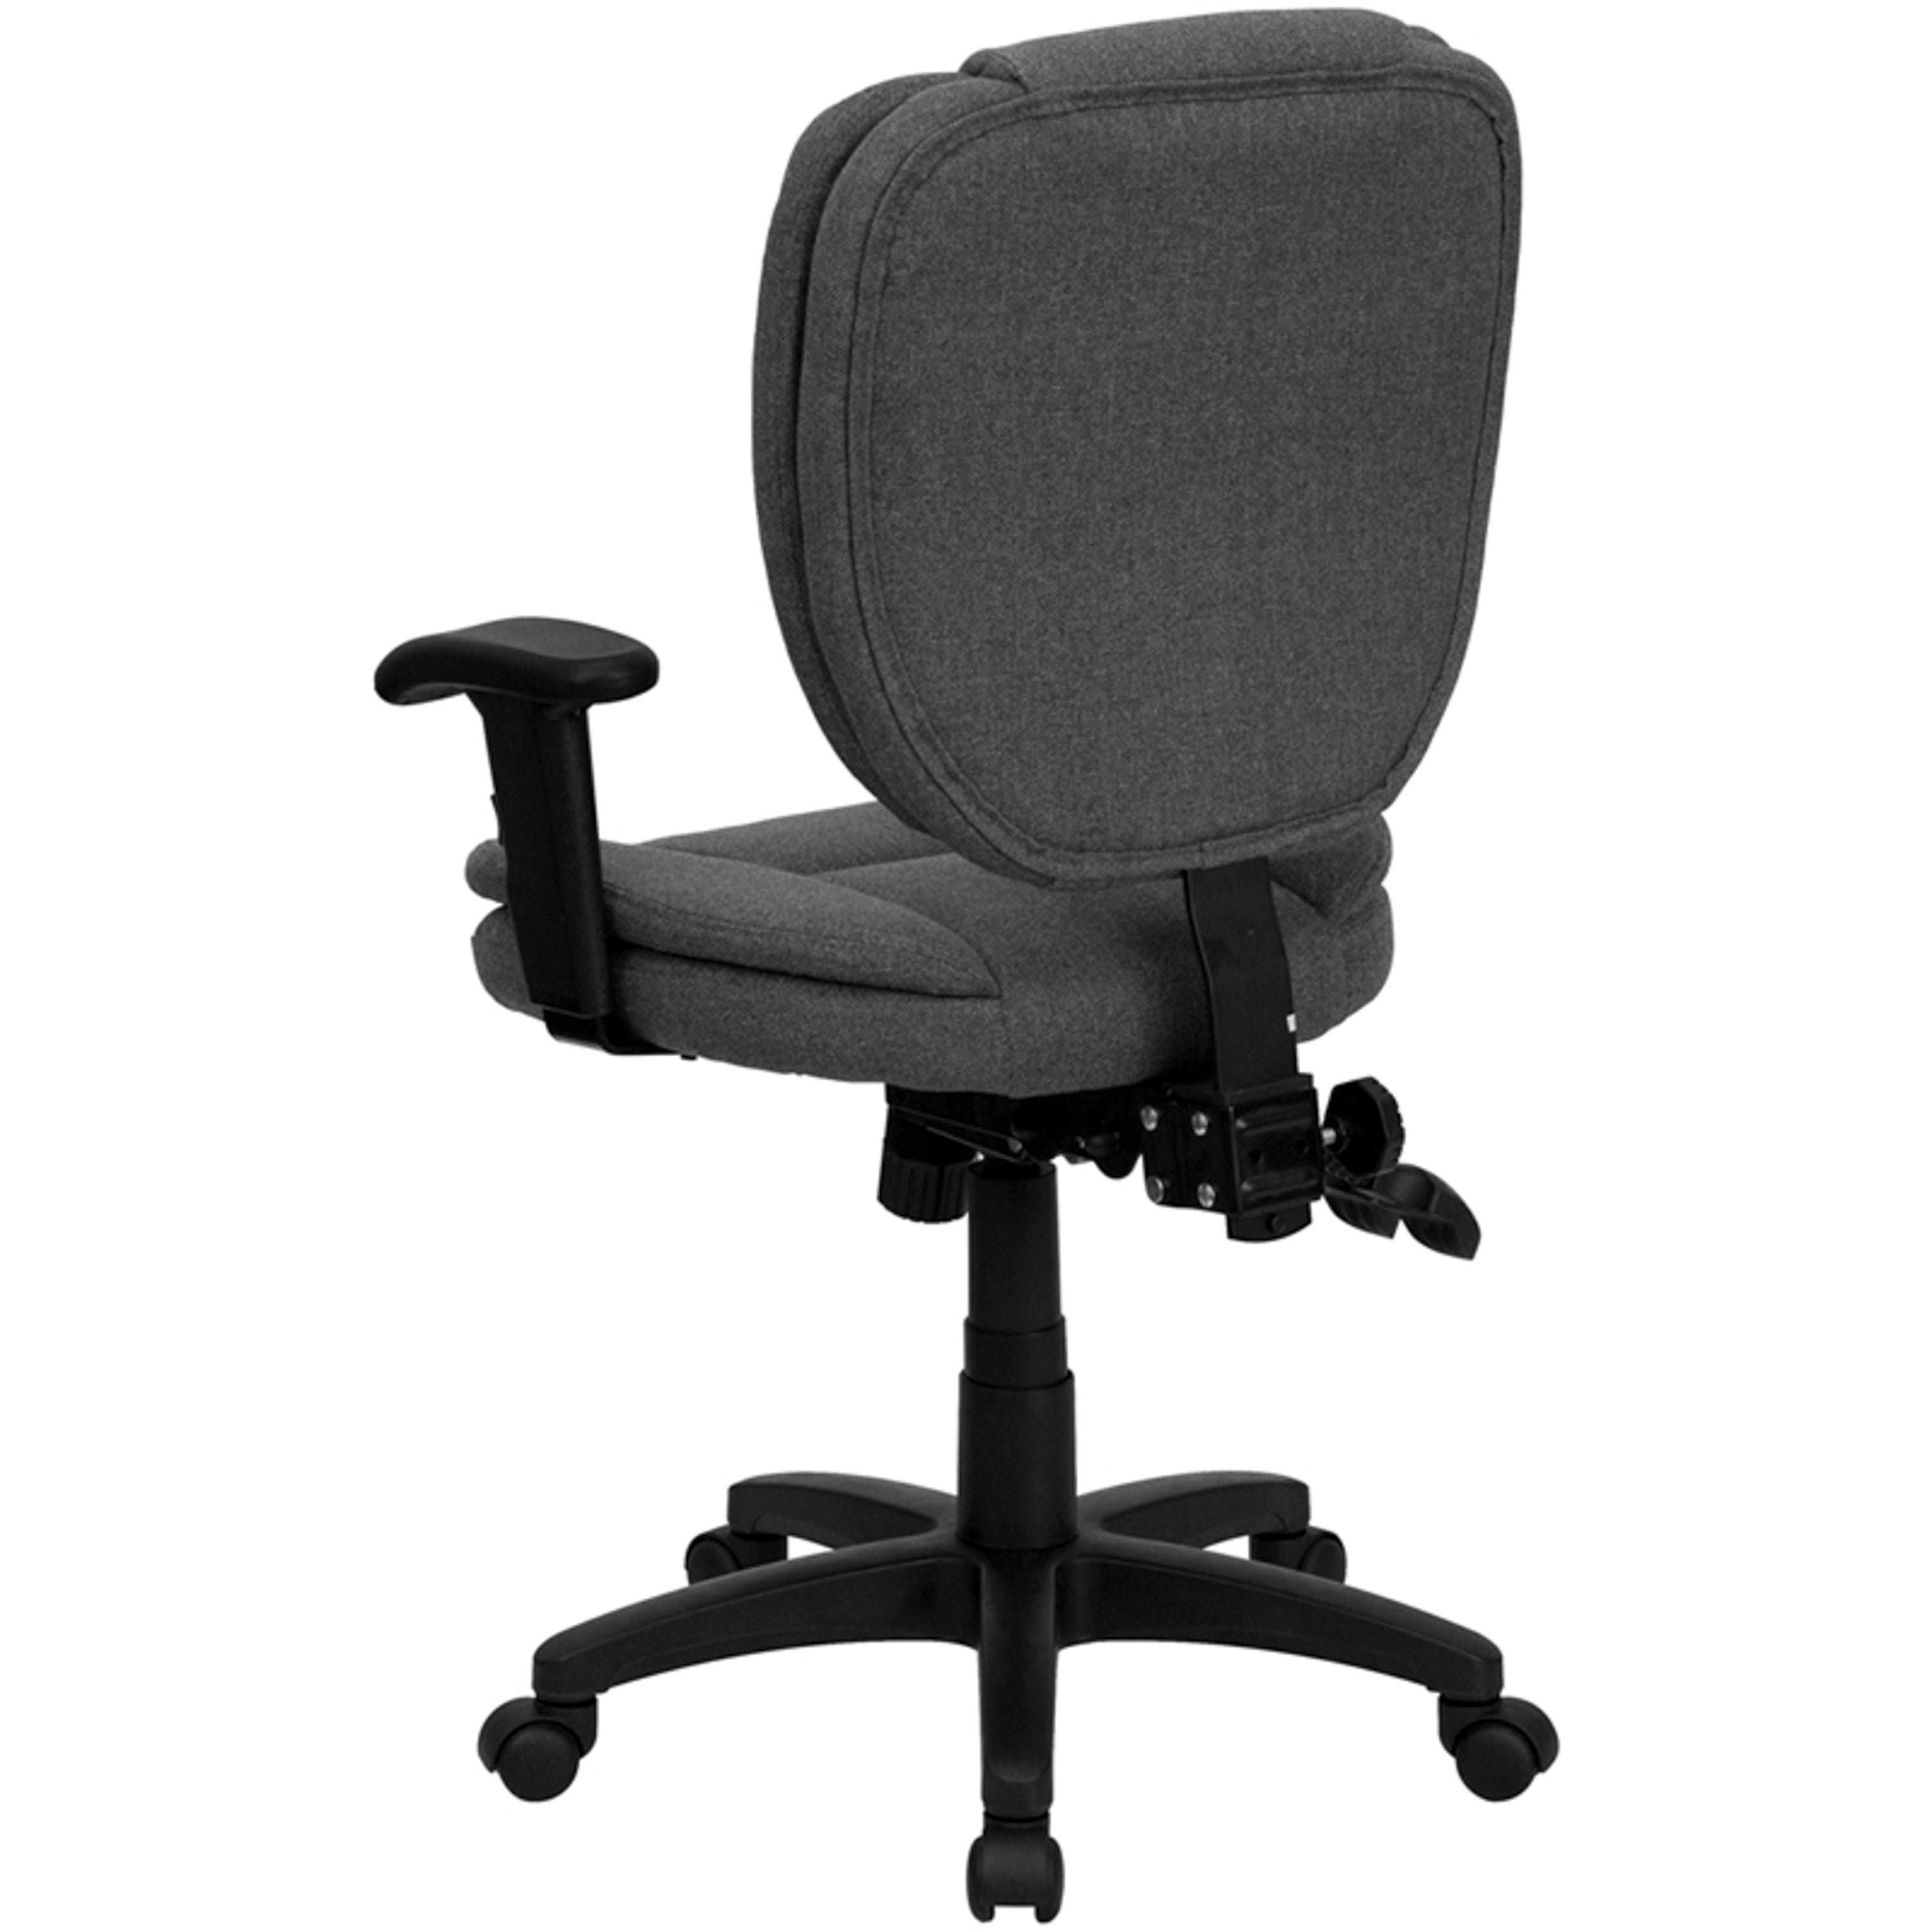 Mid-Back Multifunction Swivel Ergonomic Task Office Chair with Pillow Top Cushioning and Adjustable Arms-Office Chair-Flash Furniture-Wall2Wall Furnishings